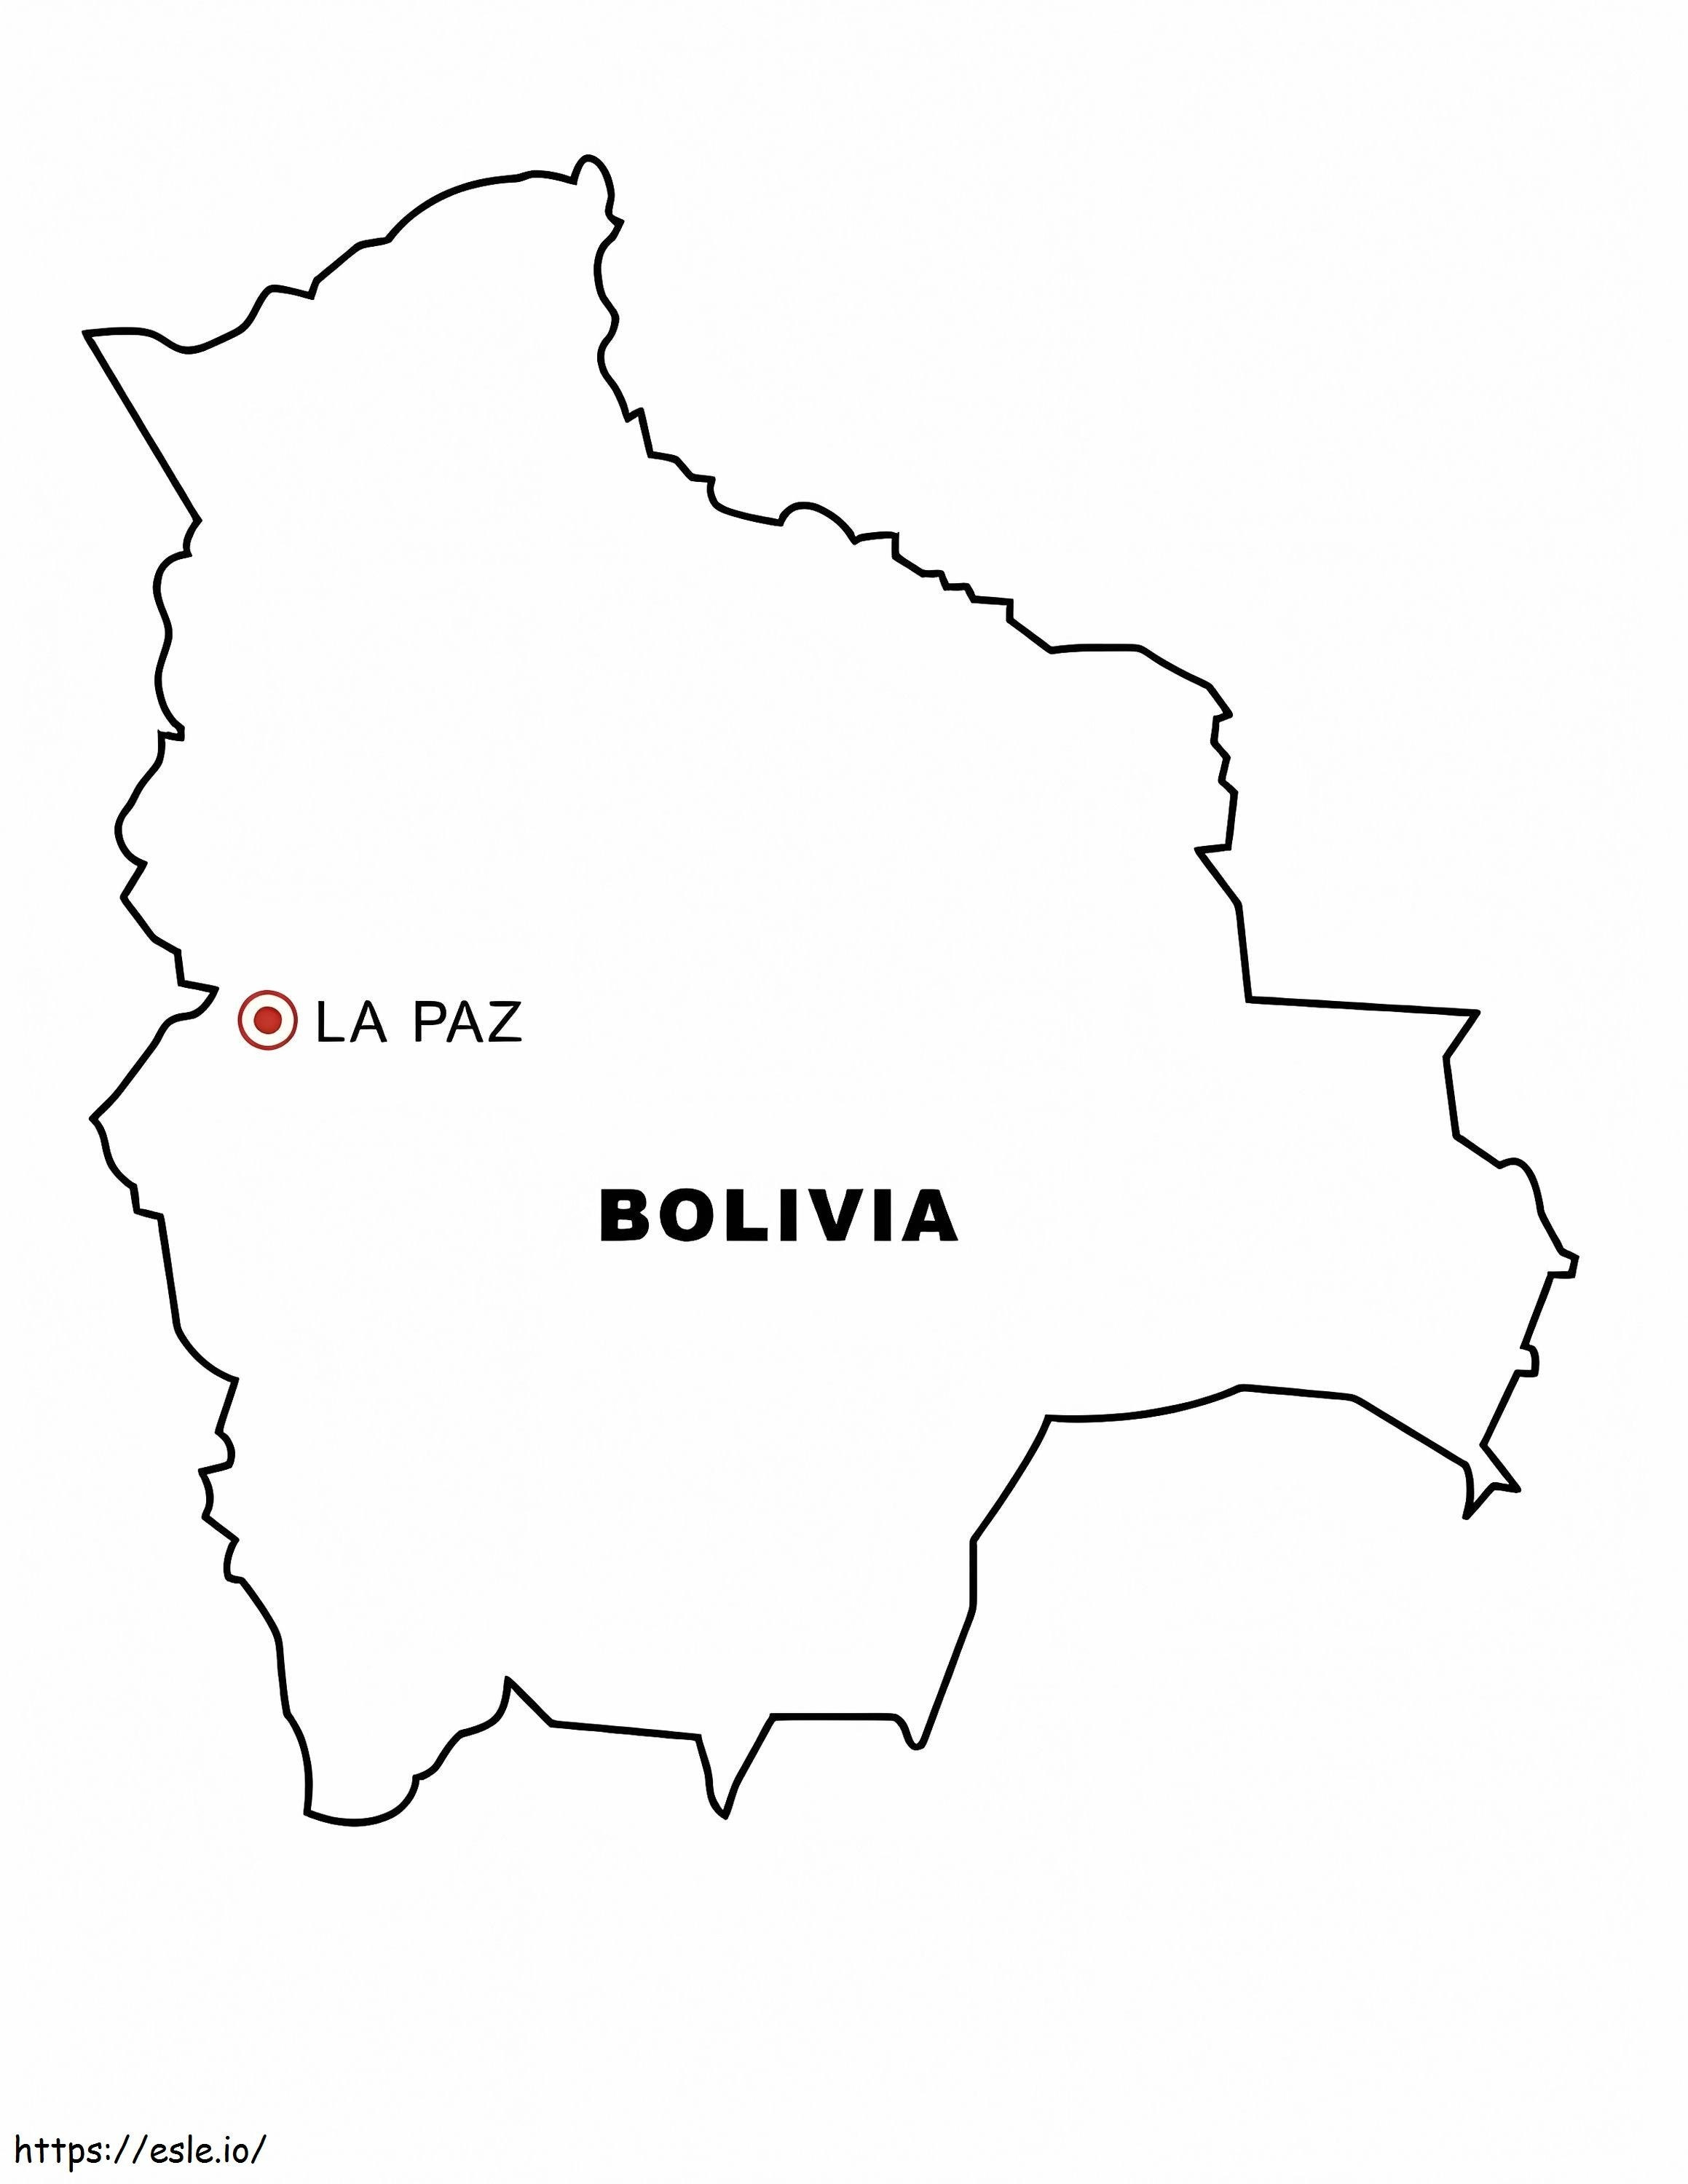 Bolivia Map coloring page